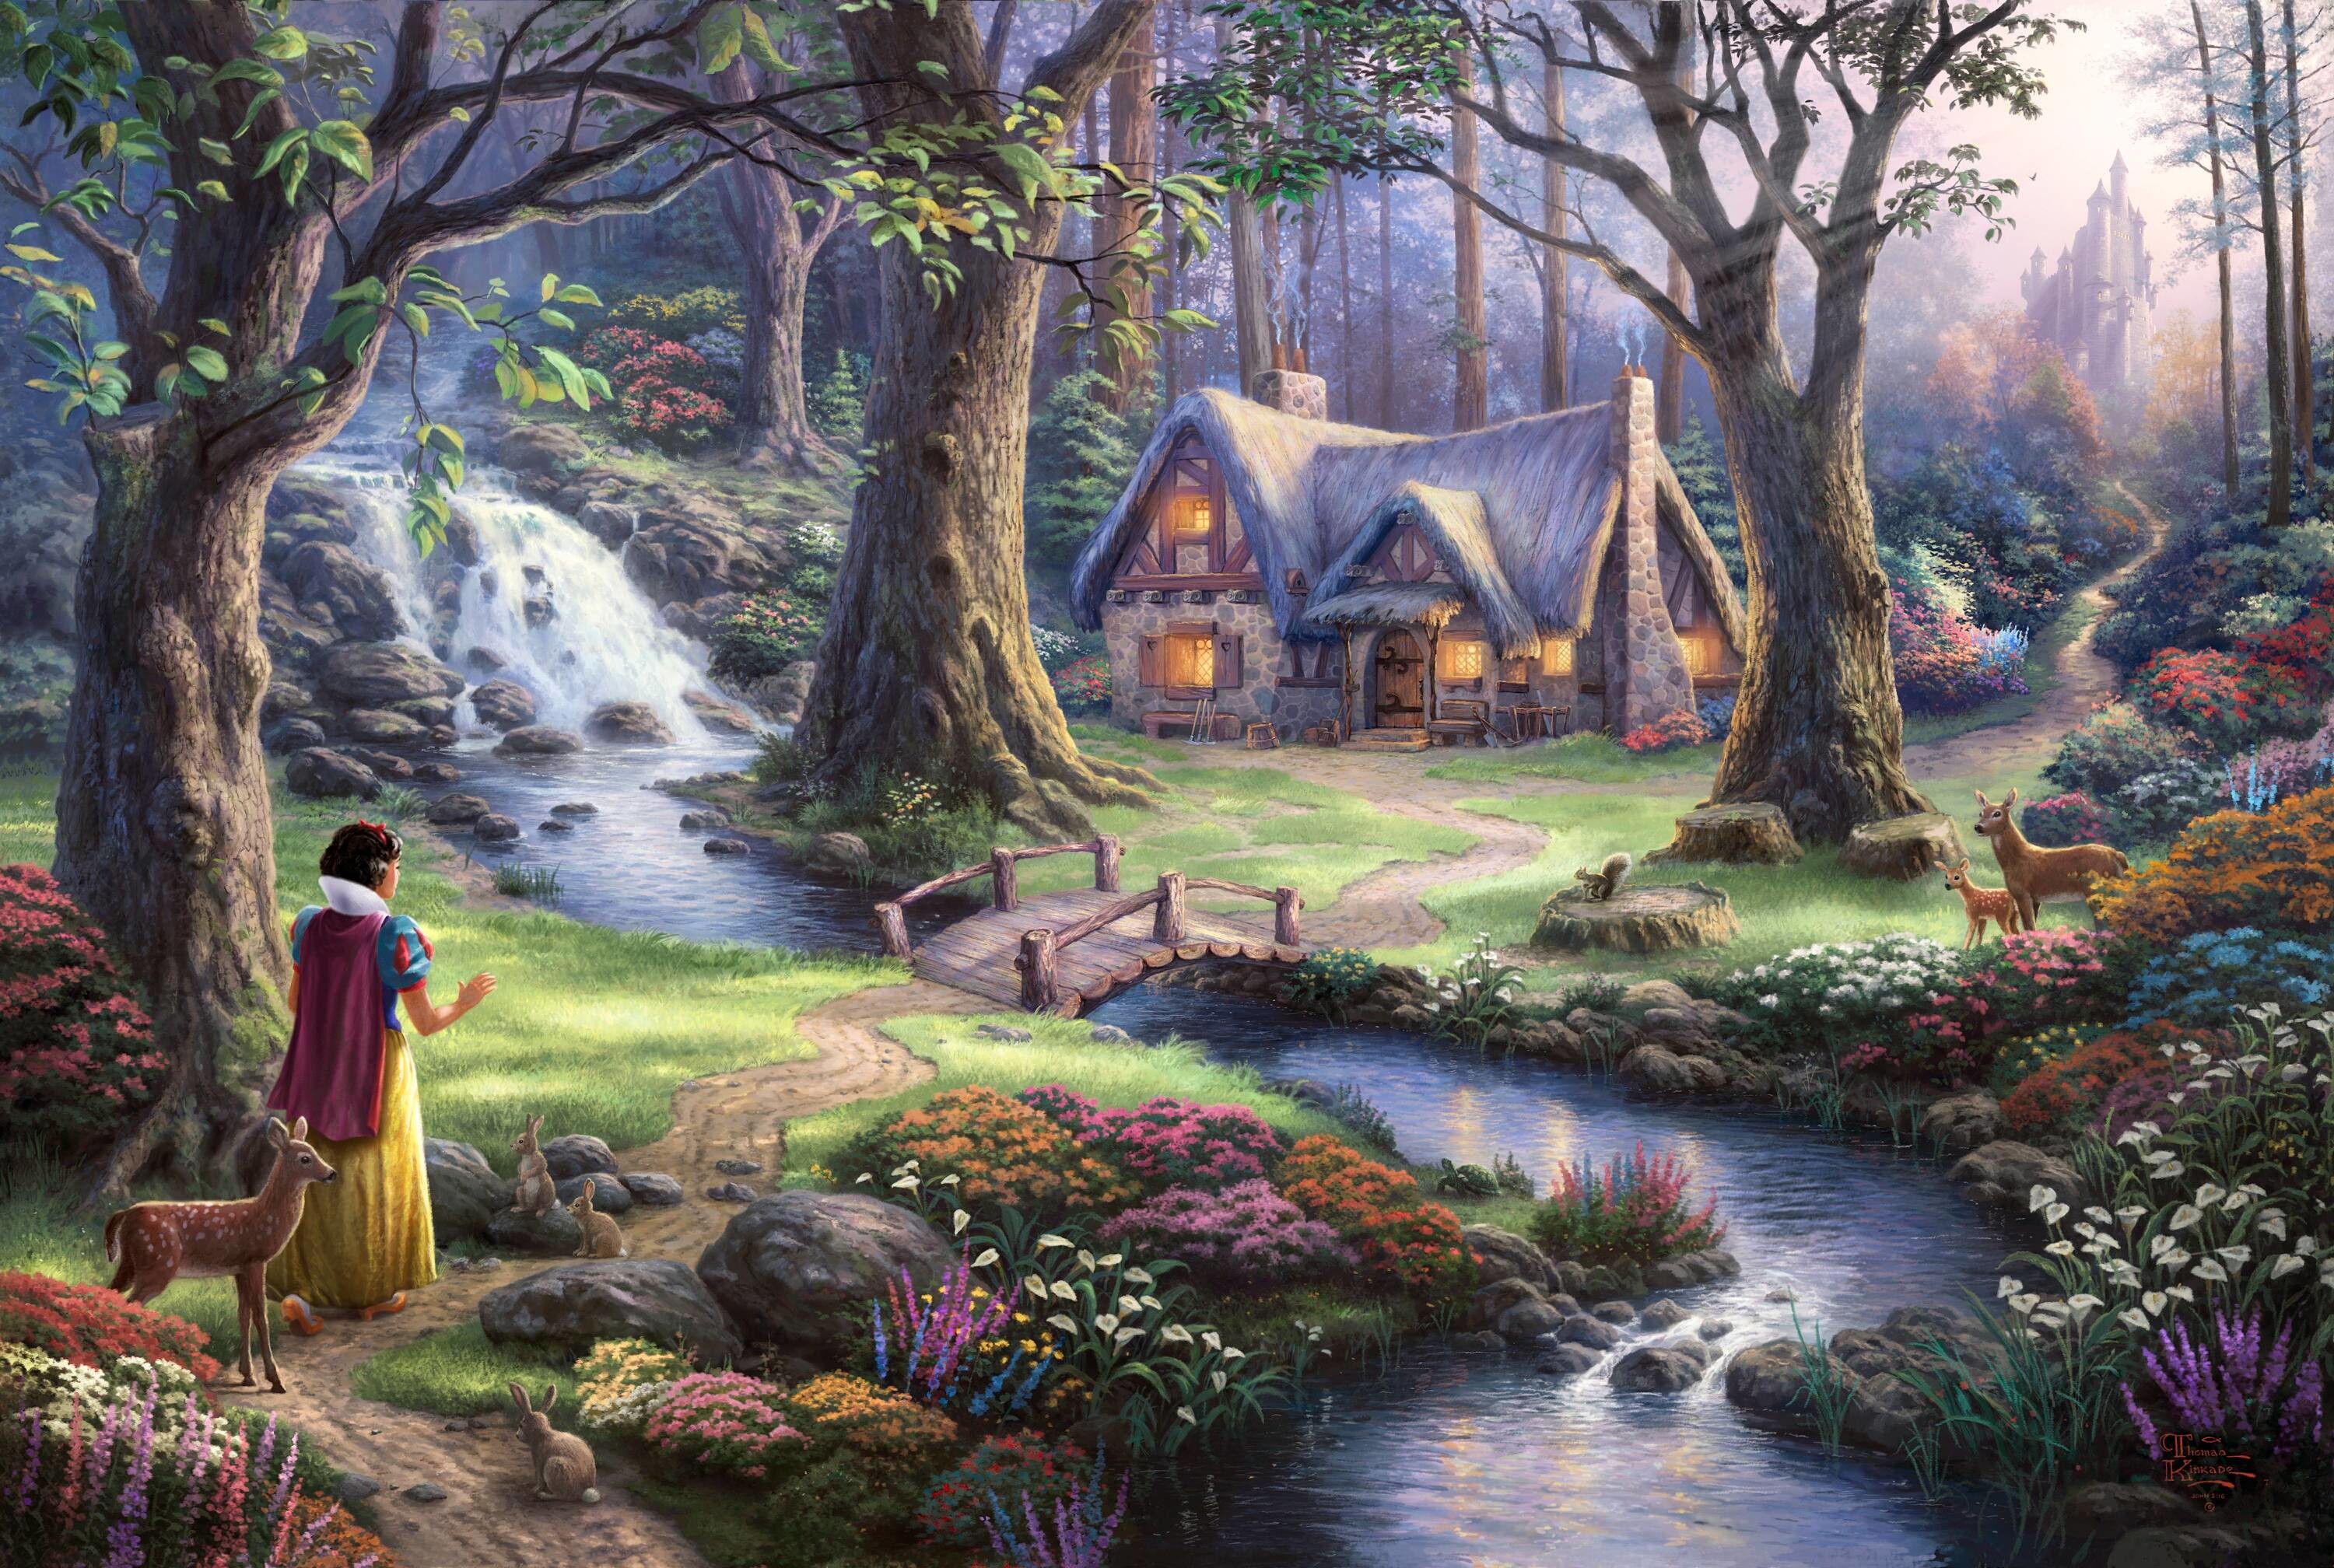 Into the Forest by Thomas Kinkade